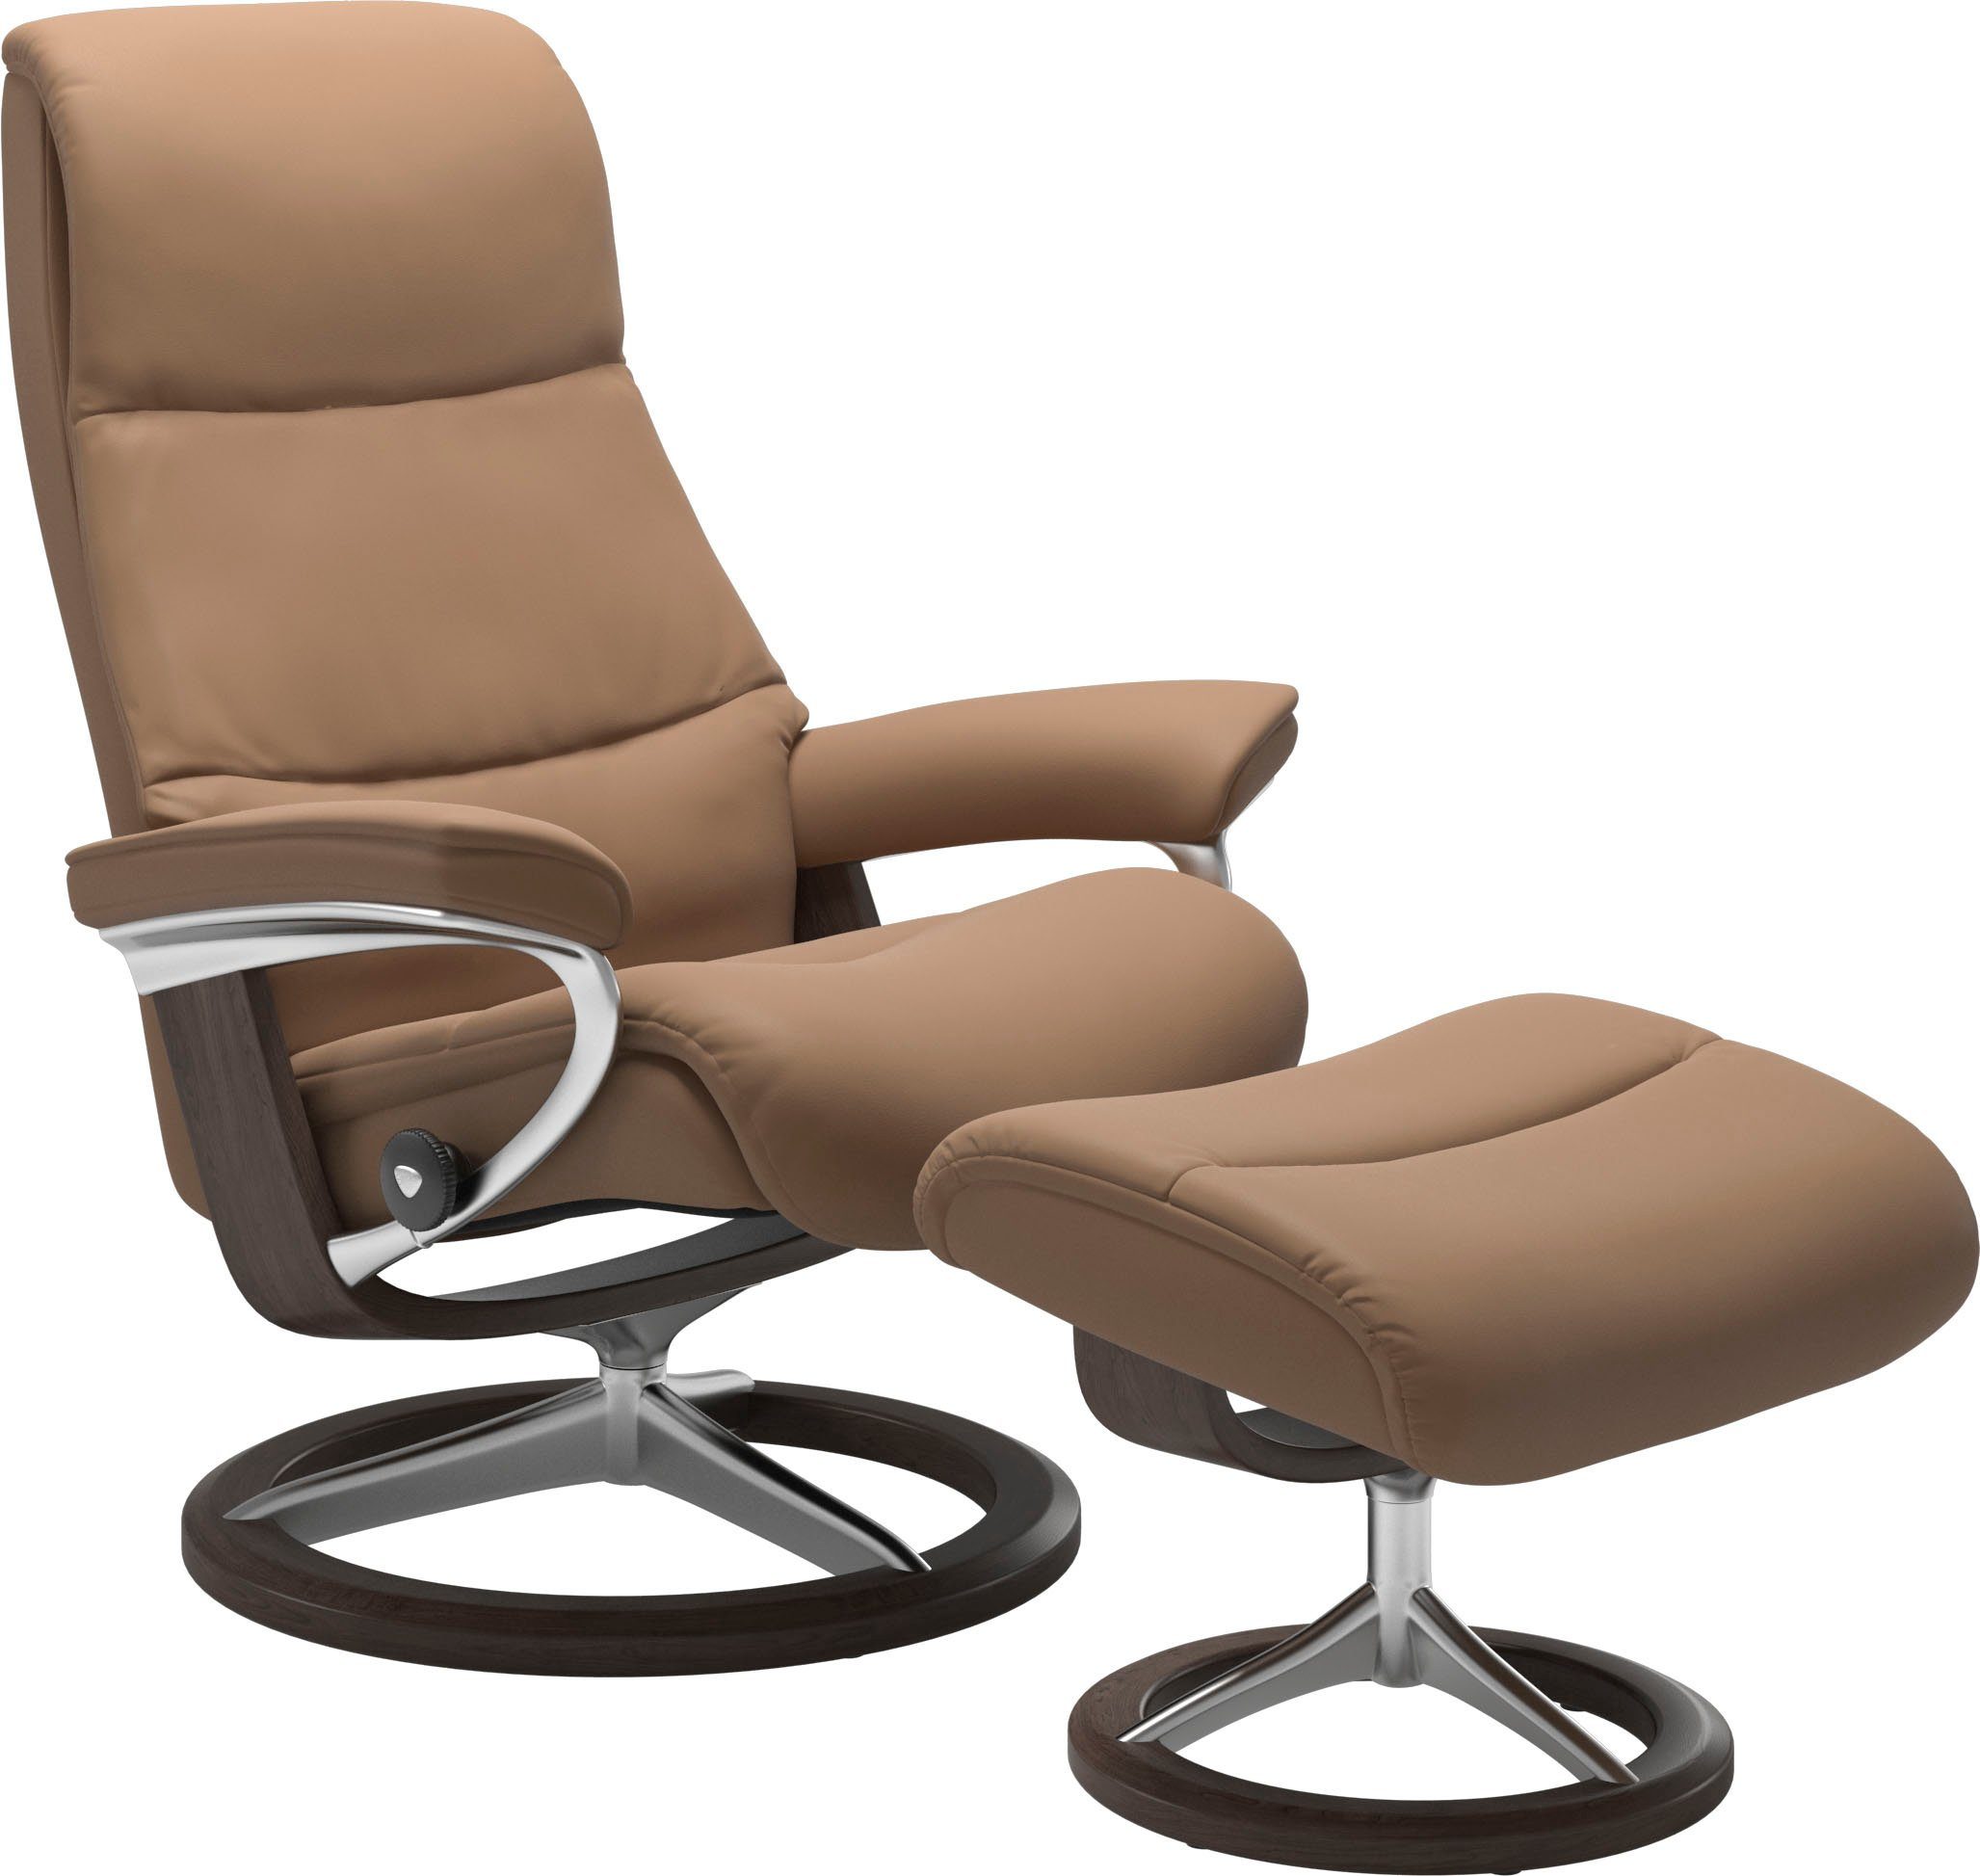 Stressless® Relaxsessel Wenge Größe Signature L,Gestell Base, View, mit